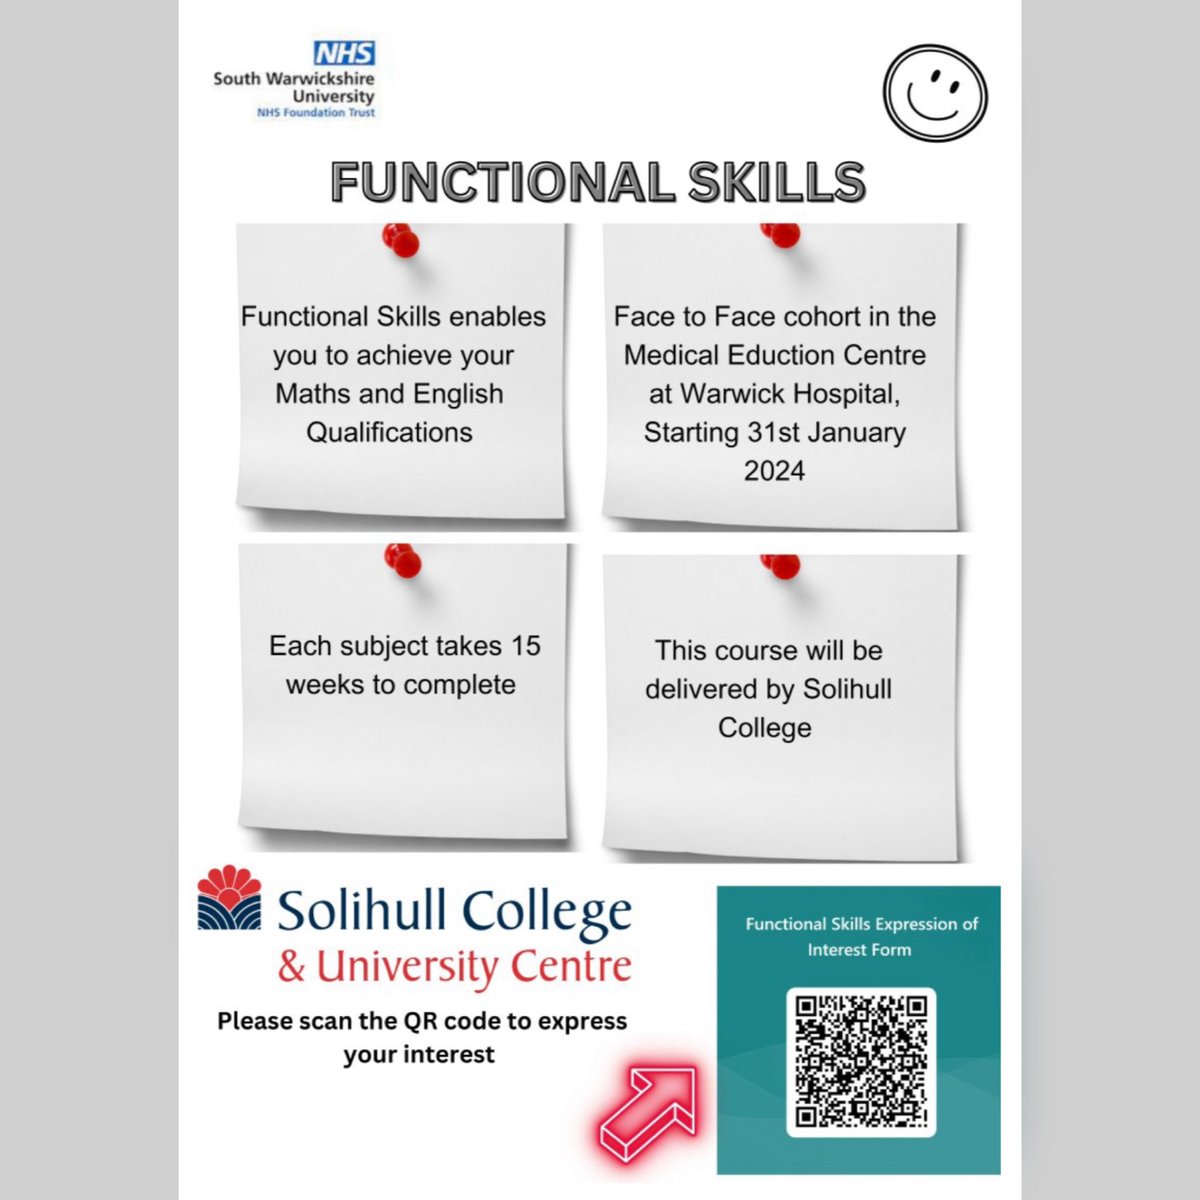 Functional Skills!💛 If you have any questions or want to get in touch, please email 📧 apprenticeships@swft.nhs.uk #FunctionalSkills #SWFTStaff #CareerOpportunities #NHSJobs #Maths #English #Progress #WideningParticipation #Learning